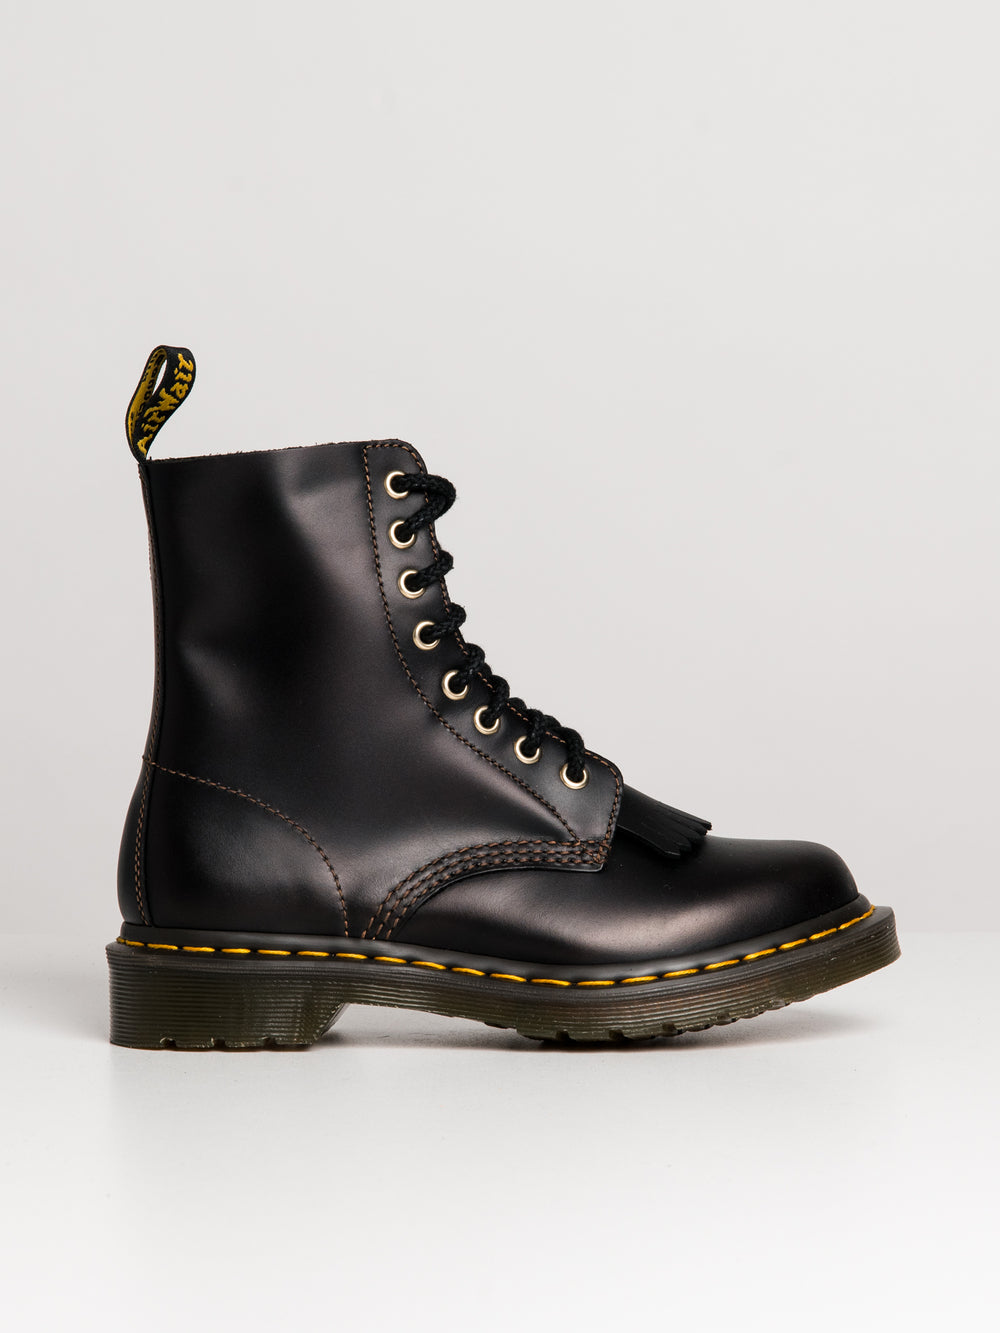 WOMENS DR MARTENS 1460 PASCAL ABRUZZO WATERPROOF BOOT - CLEARANCE